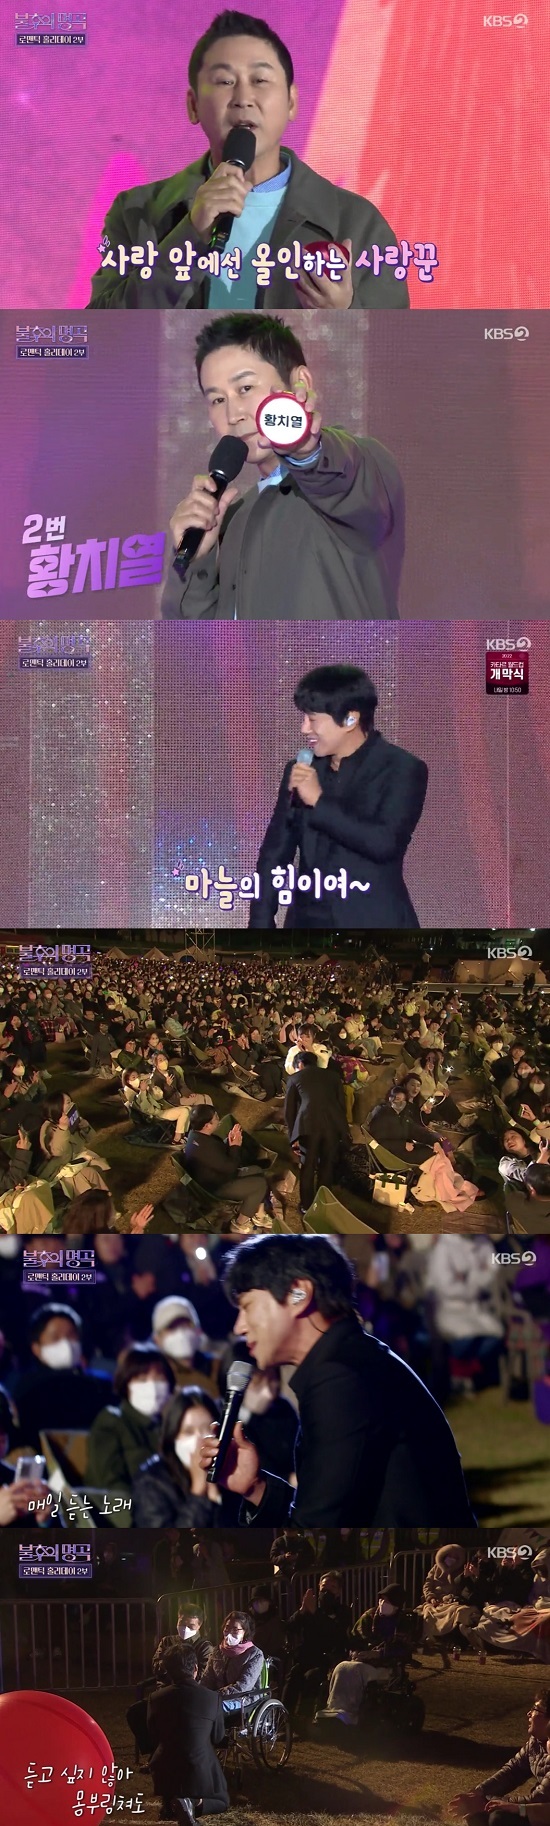 Immortal Songs: Singing the Legend Hwang Chi-yeul went down from the stage and sang in front of the Audiences.The 581th episode of KBS 2TVs Immortal Songs: Singing the Legend, which aired on the 19th, was decorated with two special episodes of Romantic Holiday 2022.On this day, music vocalists such as Spider, Ha Dong Kyun, Zanabi, Jo Sung-mo, Bobby kim, Big Mama Lee Young-hyun, Hwang Chi-yeul, Kim Ho-joong and others sang romantic songs and breathed with Audiences.Bobby kim came on the first stage, followed by Hwang Chi-yeul.Shin Dong-yup said, I think it is more Romantic than any of the performers today.Even though I had only 250,000 won for Property, I bought a gift of 220,000 won for my girlfriend. It is called A loved one who is all in front of love. Hwang Chi-yeul started singing, and then continued the second song Everyday Listening stage.He went down from the stage and sang in front of the Audiences, kneeling in front of an Audience in a bathchair and attracting attention.Picture: KBS 2TV broadcast screen